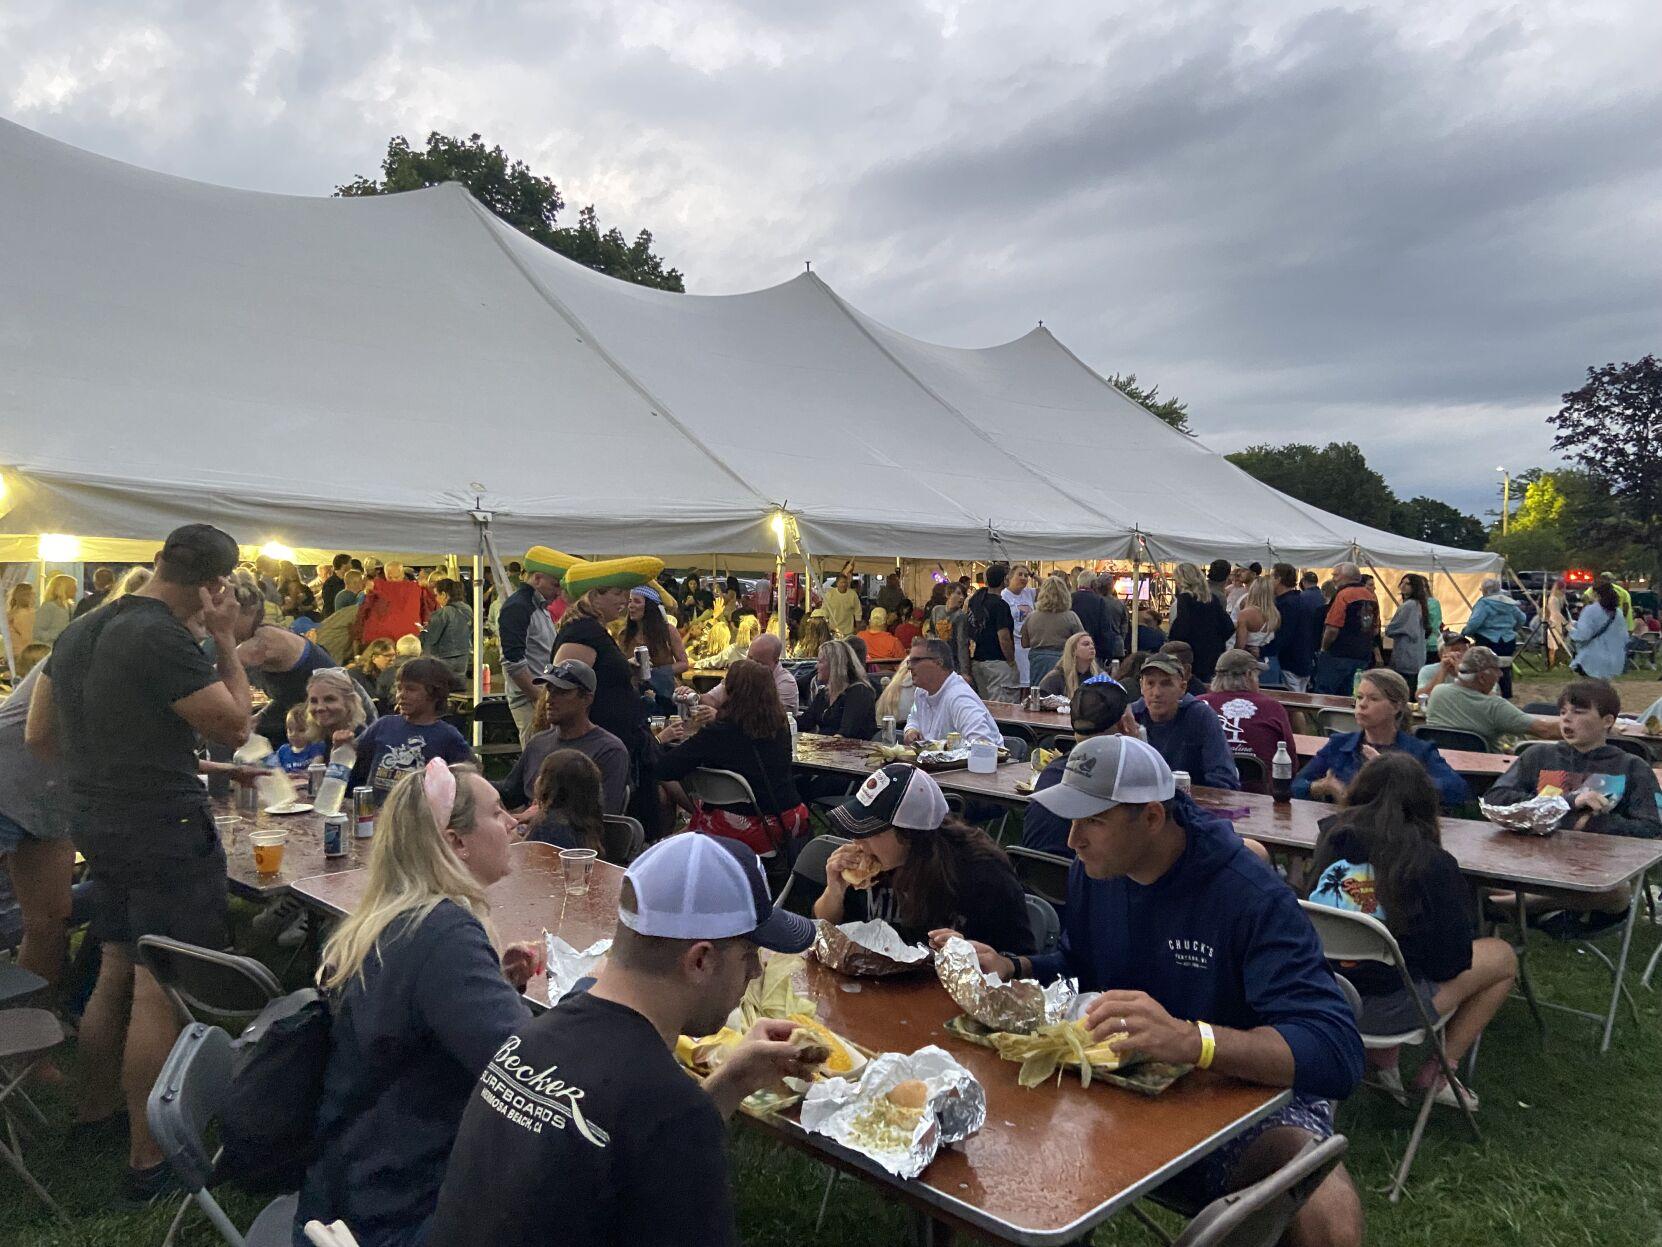 39 corn, brat and firework photos from the 2022 Williams Bay Corn and